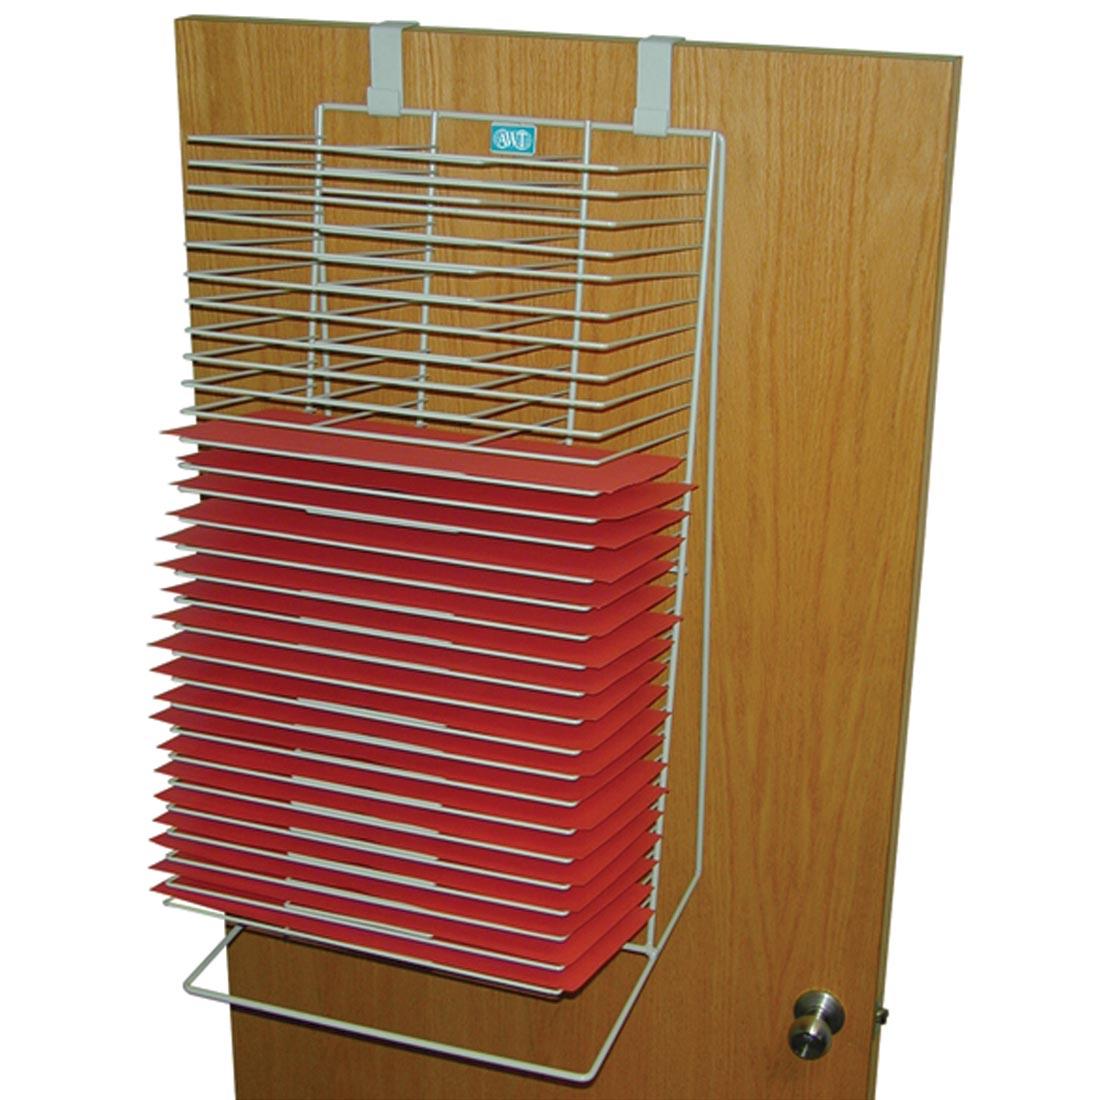 drying rack with red papers in it, hanging from a door